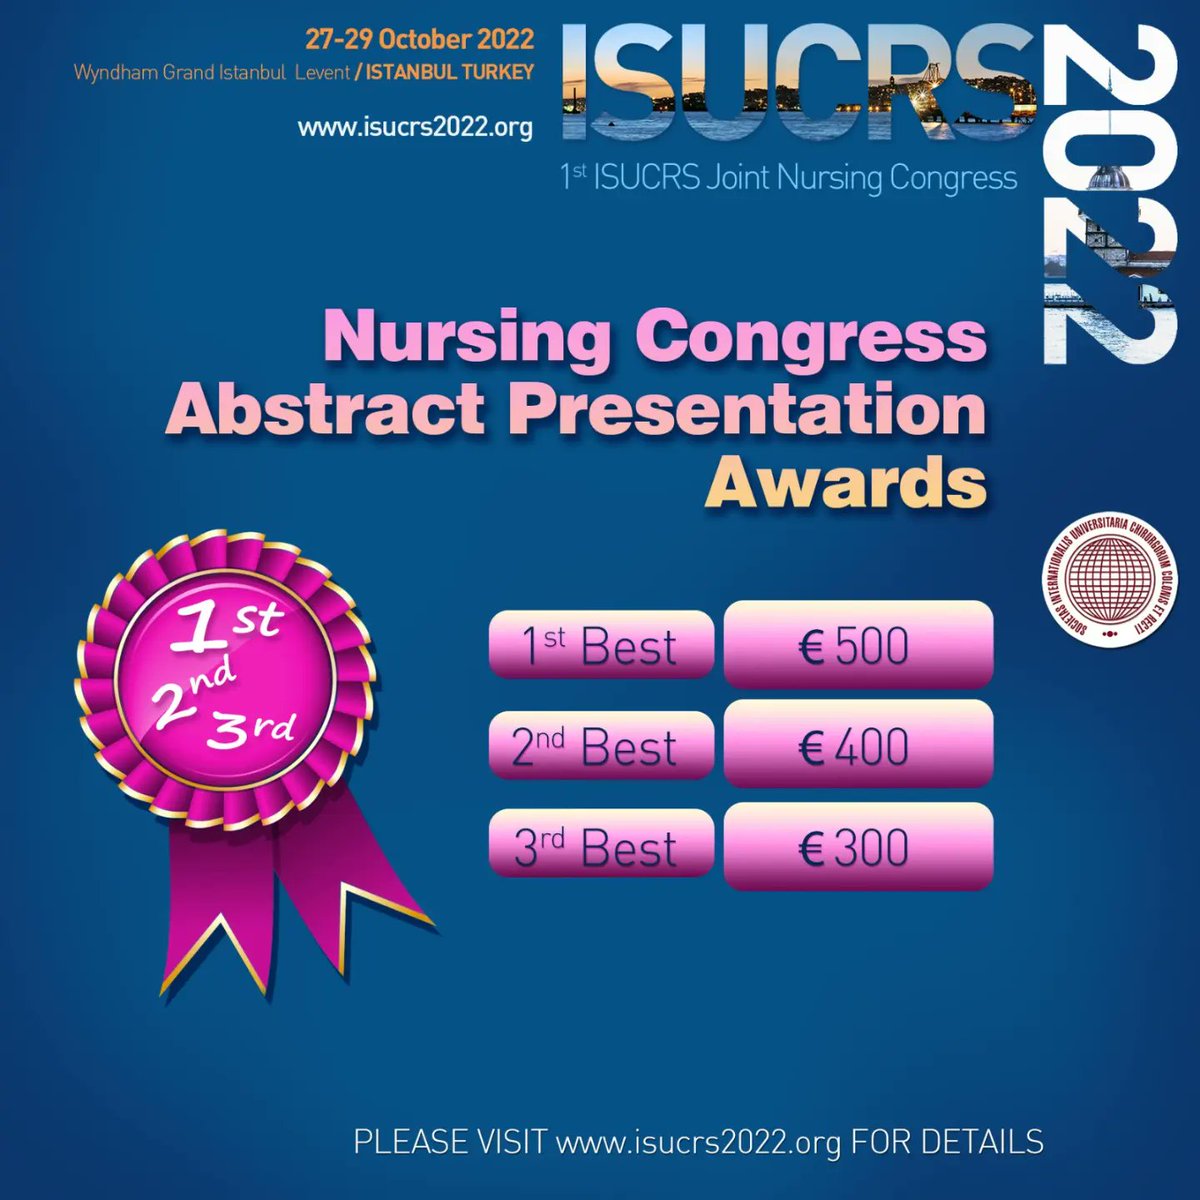 Best 3 abstracts in each category will be rewarded. Don't forget to submit your abstracts before 23.59 on 30 June 2022! #isucrs #isucrs2022 #turkey